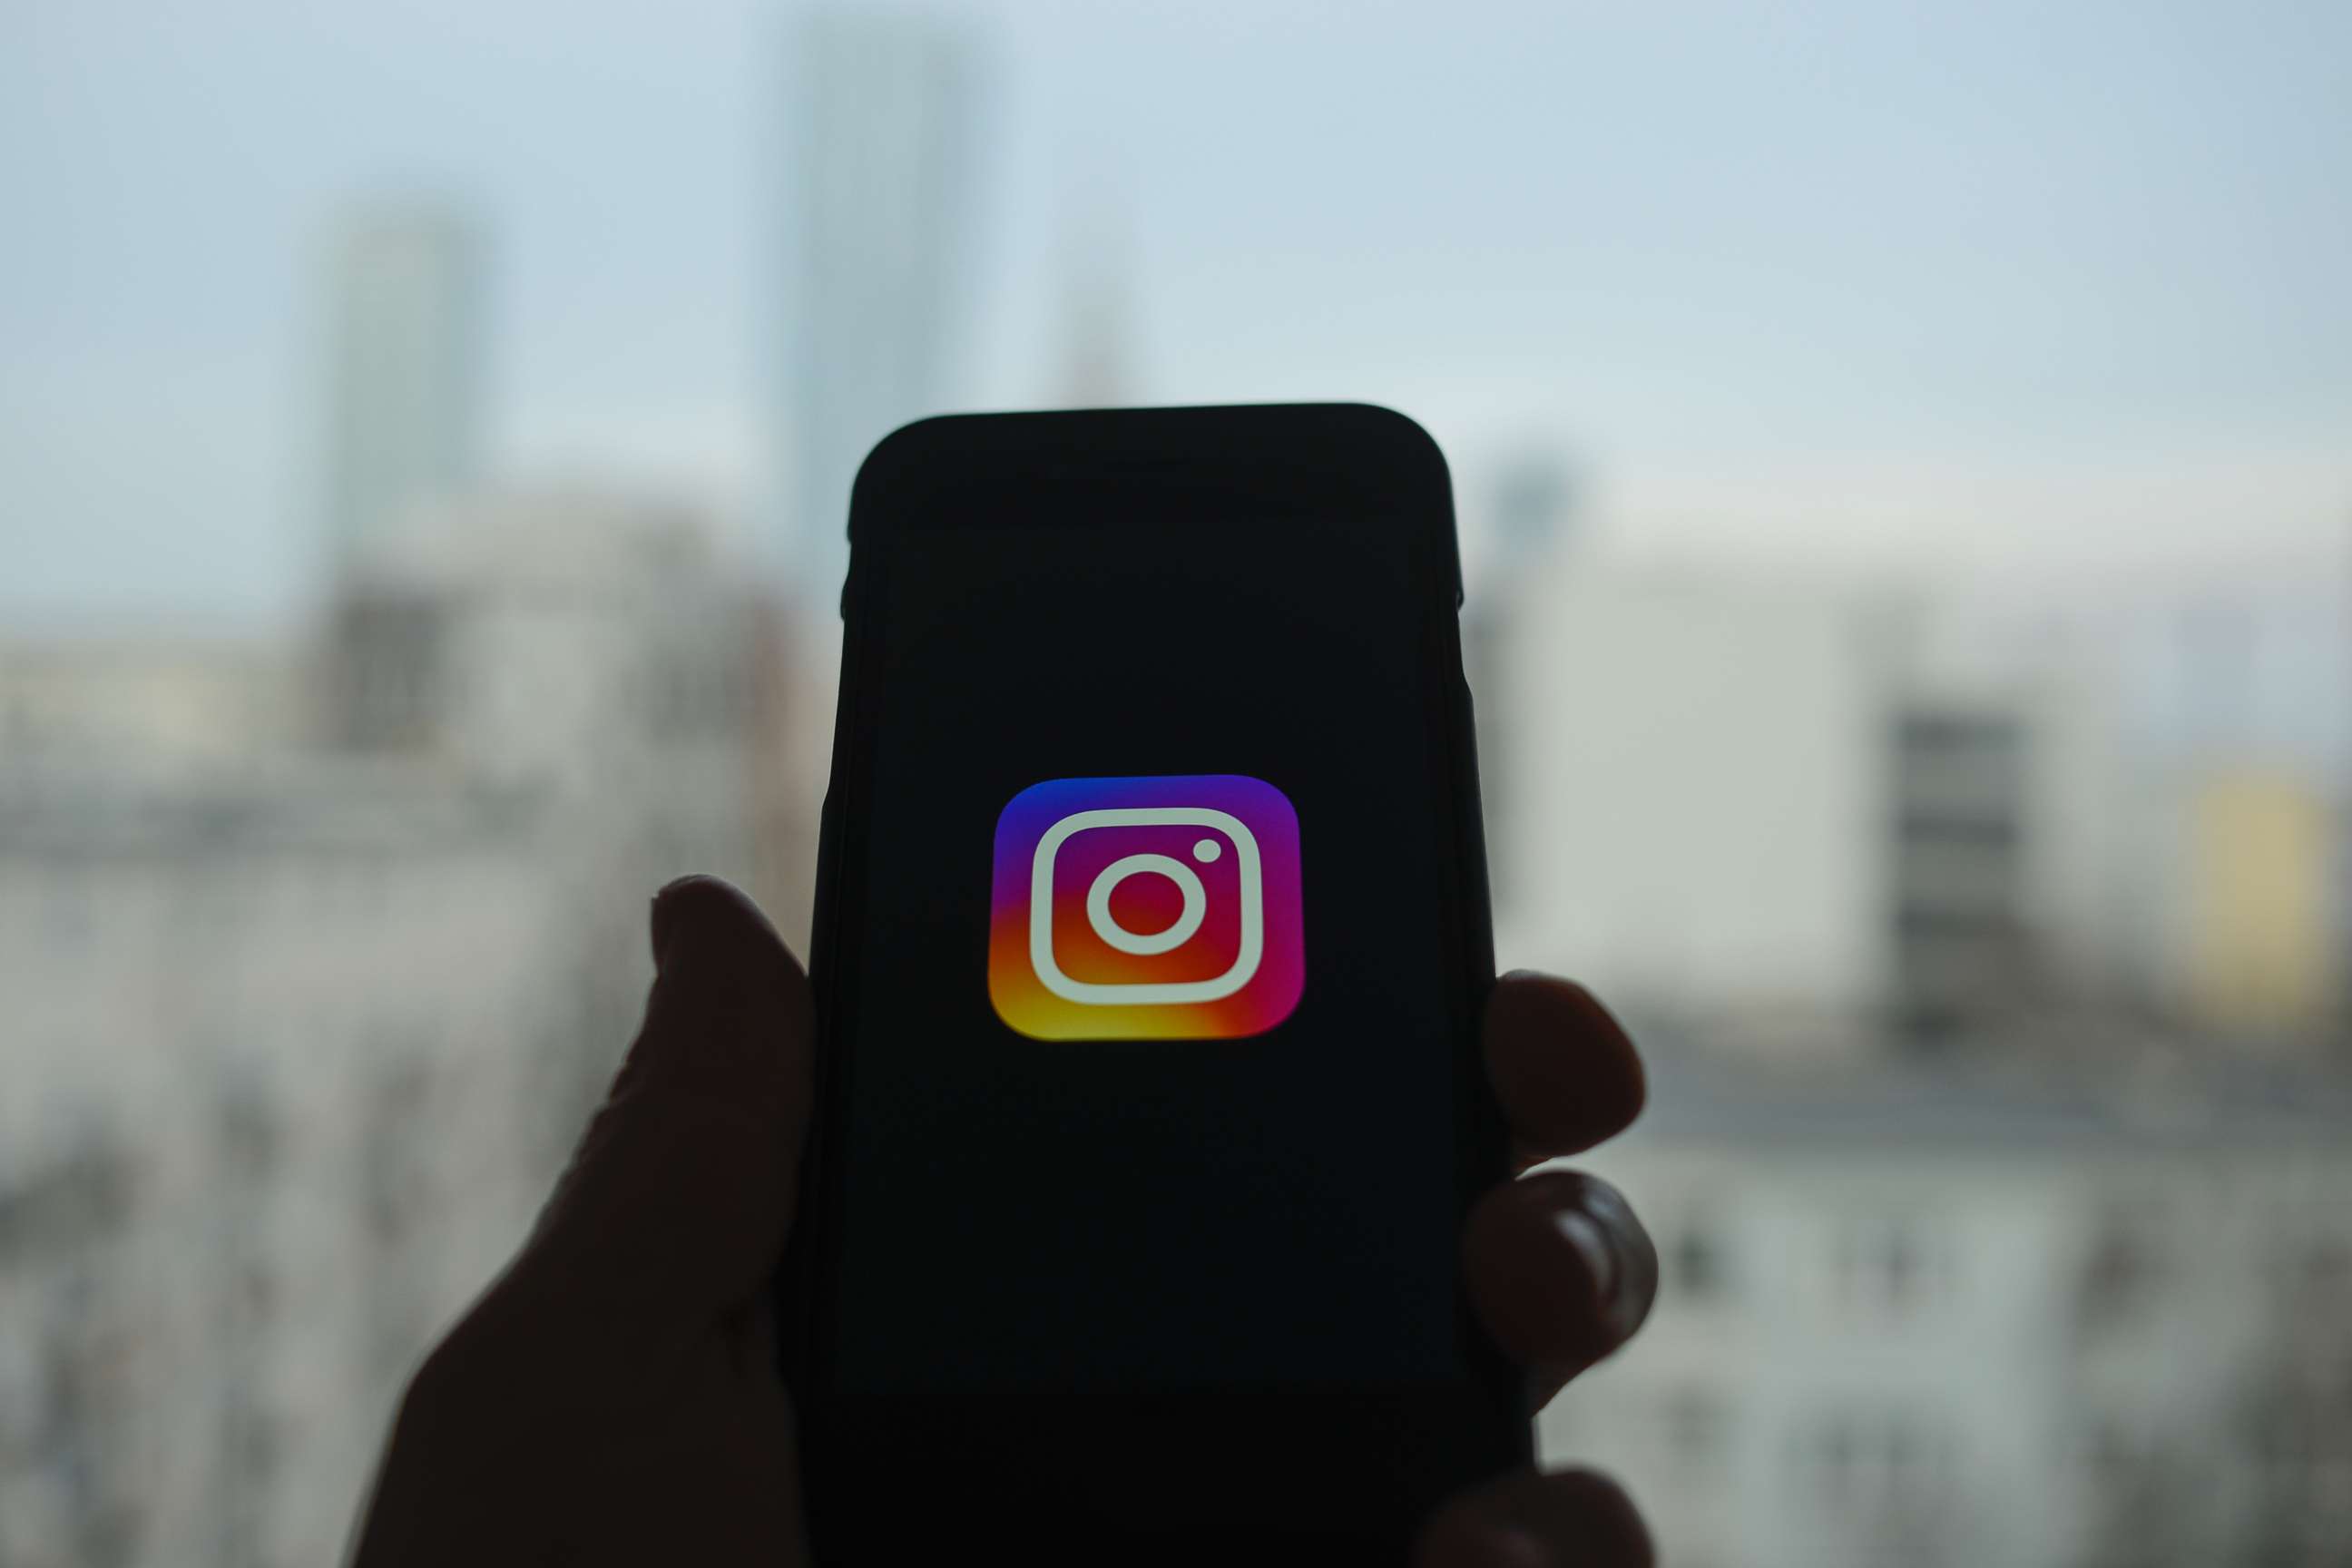 PHOTO: The Instagram logo is seen on a smartphone in this photo made on March 5, 2018.